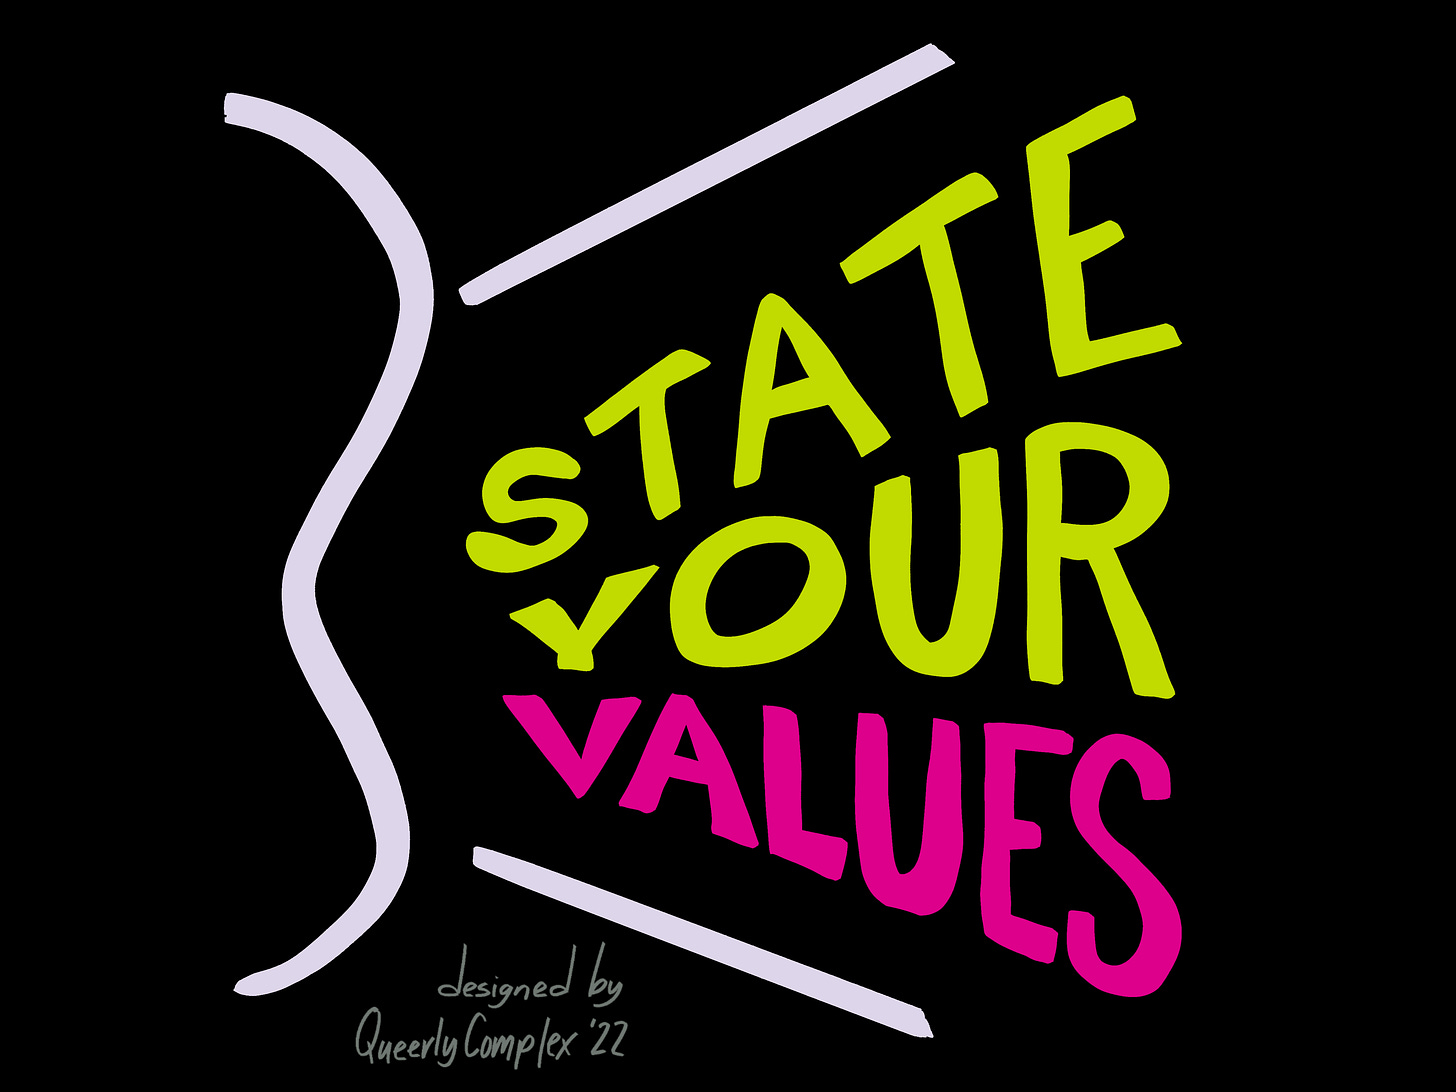 "State your values" in hand lettering with a white symbol that looks like lips in profile speaking. Designed by Queerly Complex.